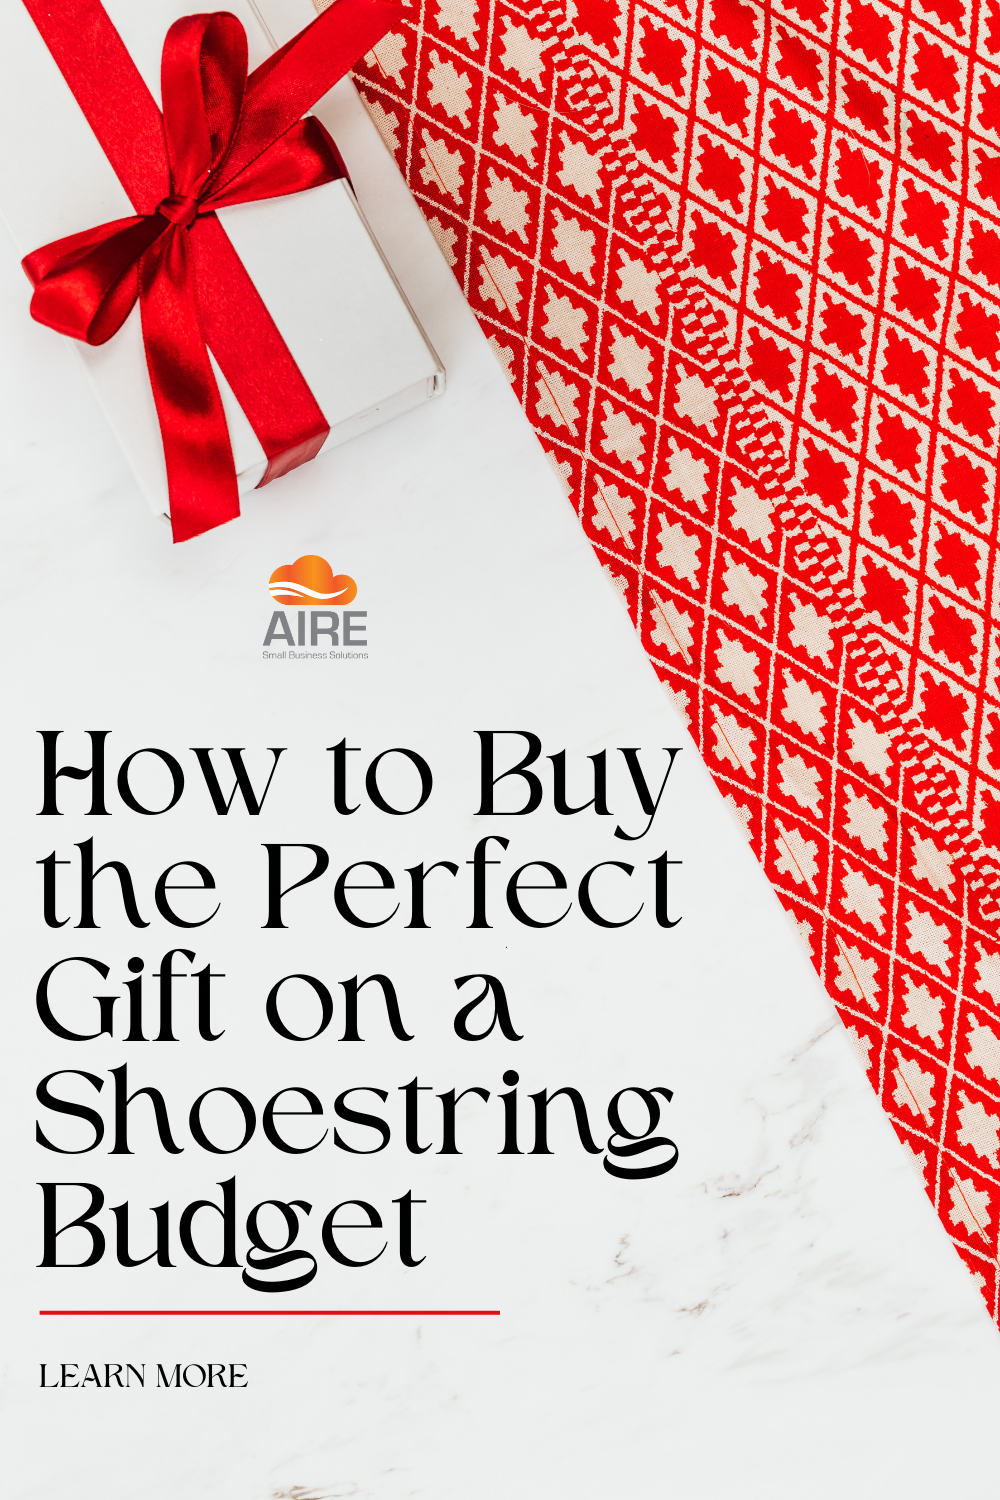 How to Buy the Perfect Gift on a Shoestring Budget